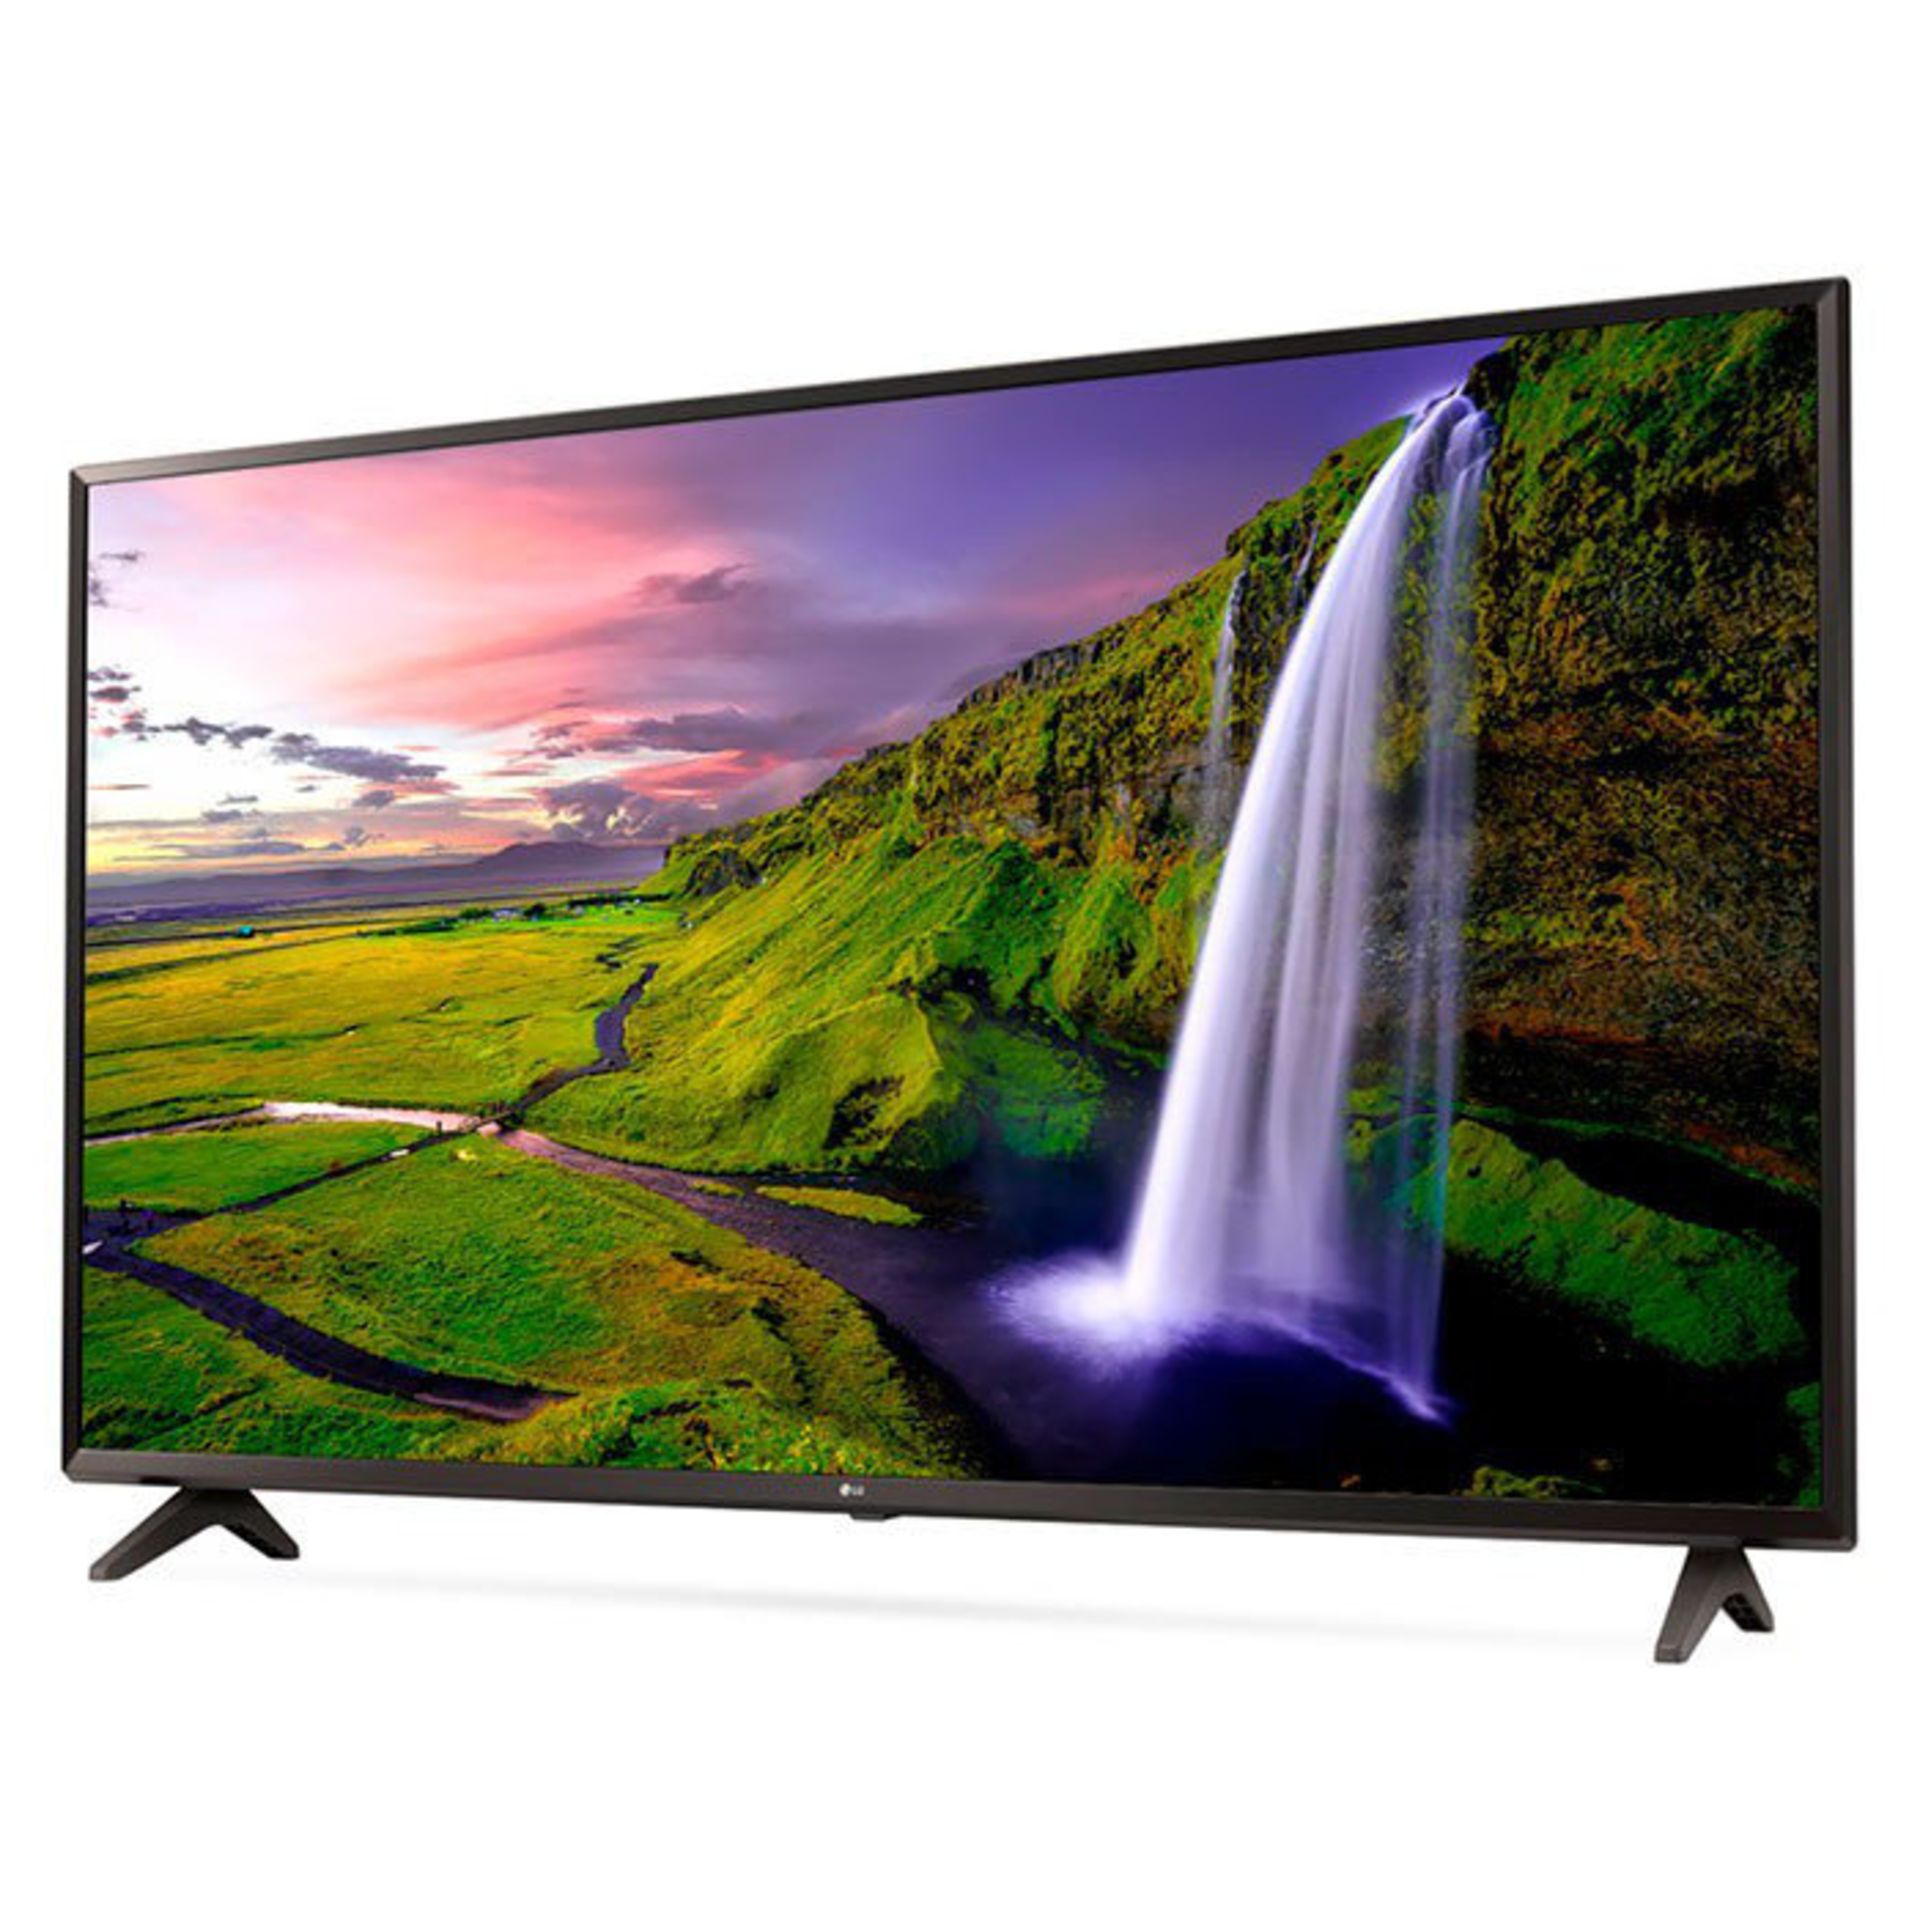 V Grade A LG 49 Inch ACTIVE HDR 4K ULTRA HD LED SMART TV WITH FREEVIEW HD & WEBOS 4.0 & WIFI - AI